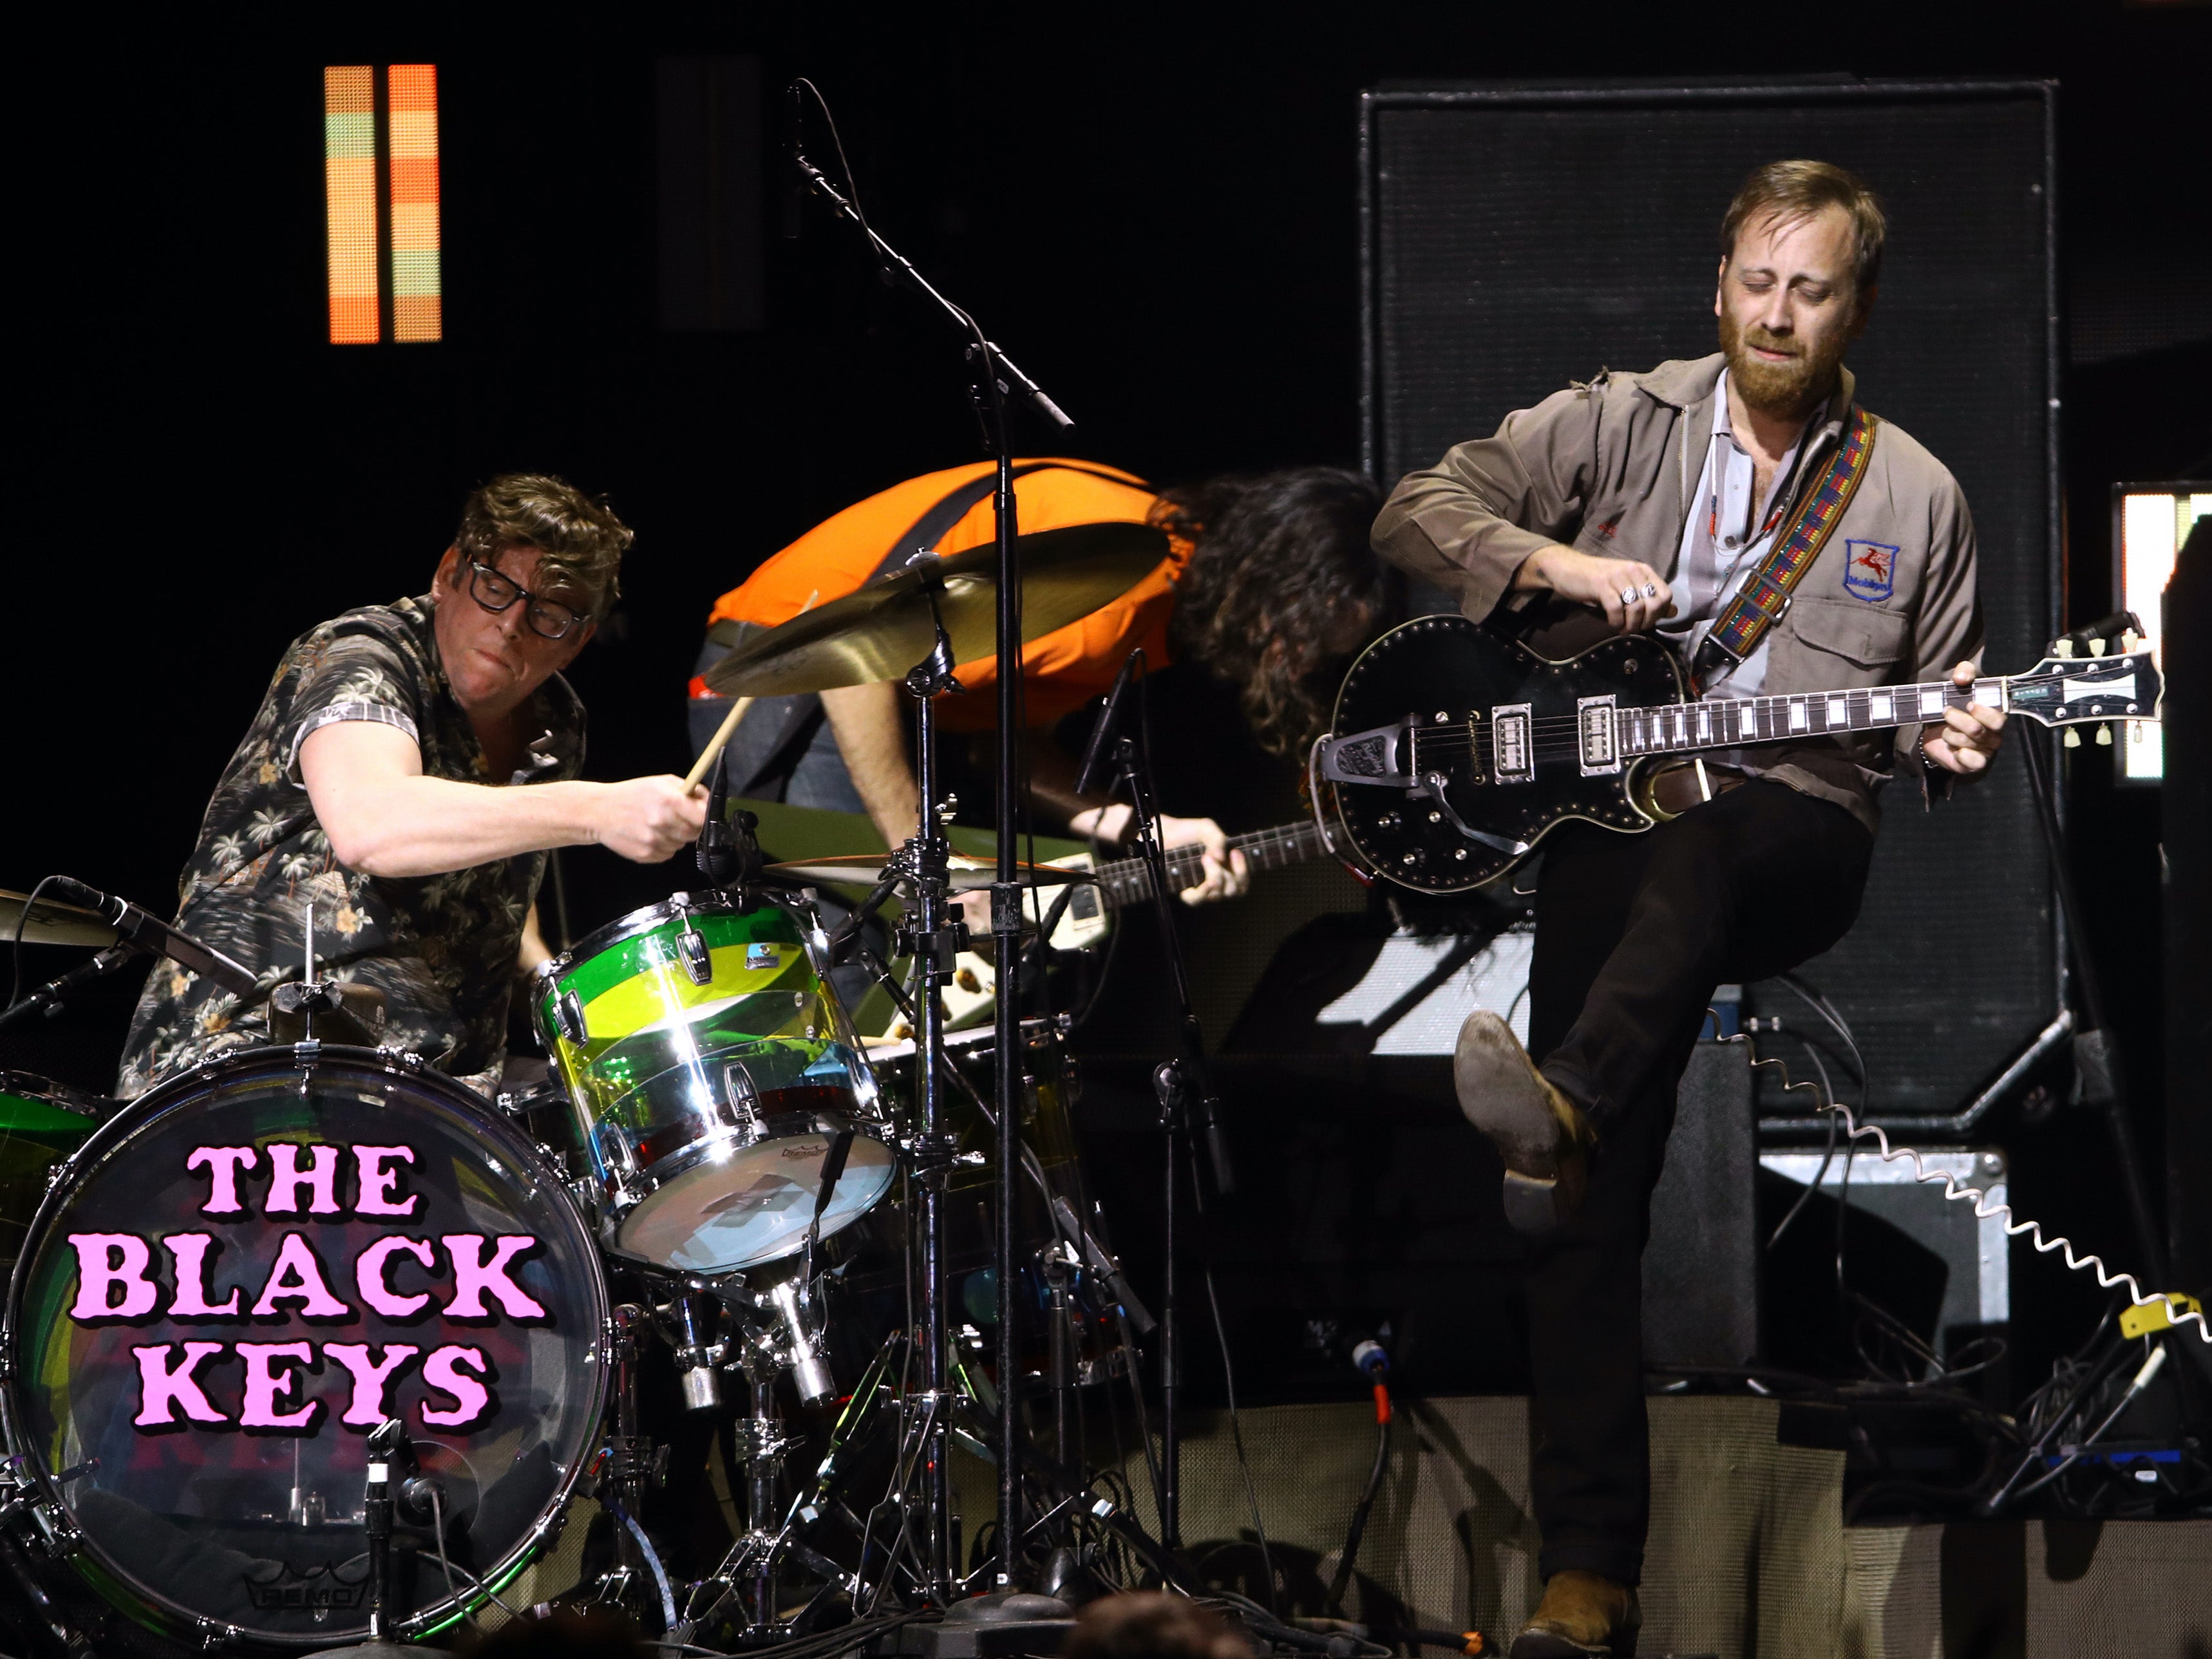 Delta force: The Black Keys performing live in 2020